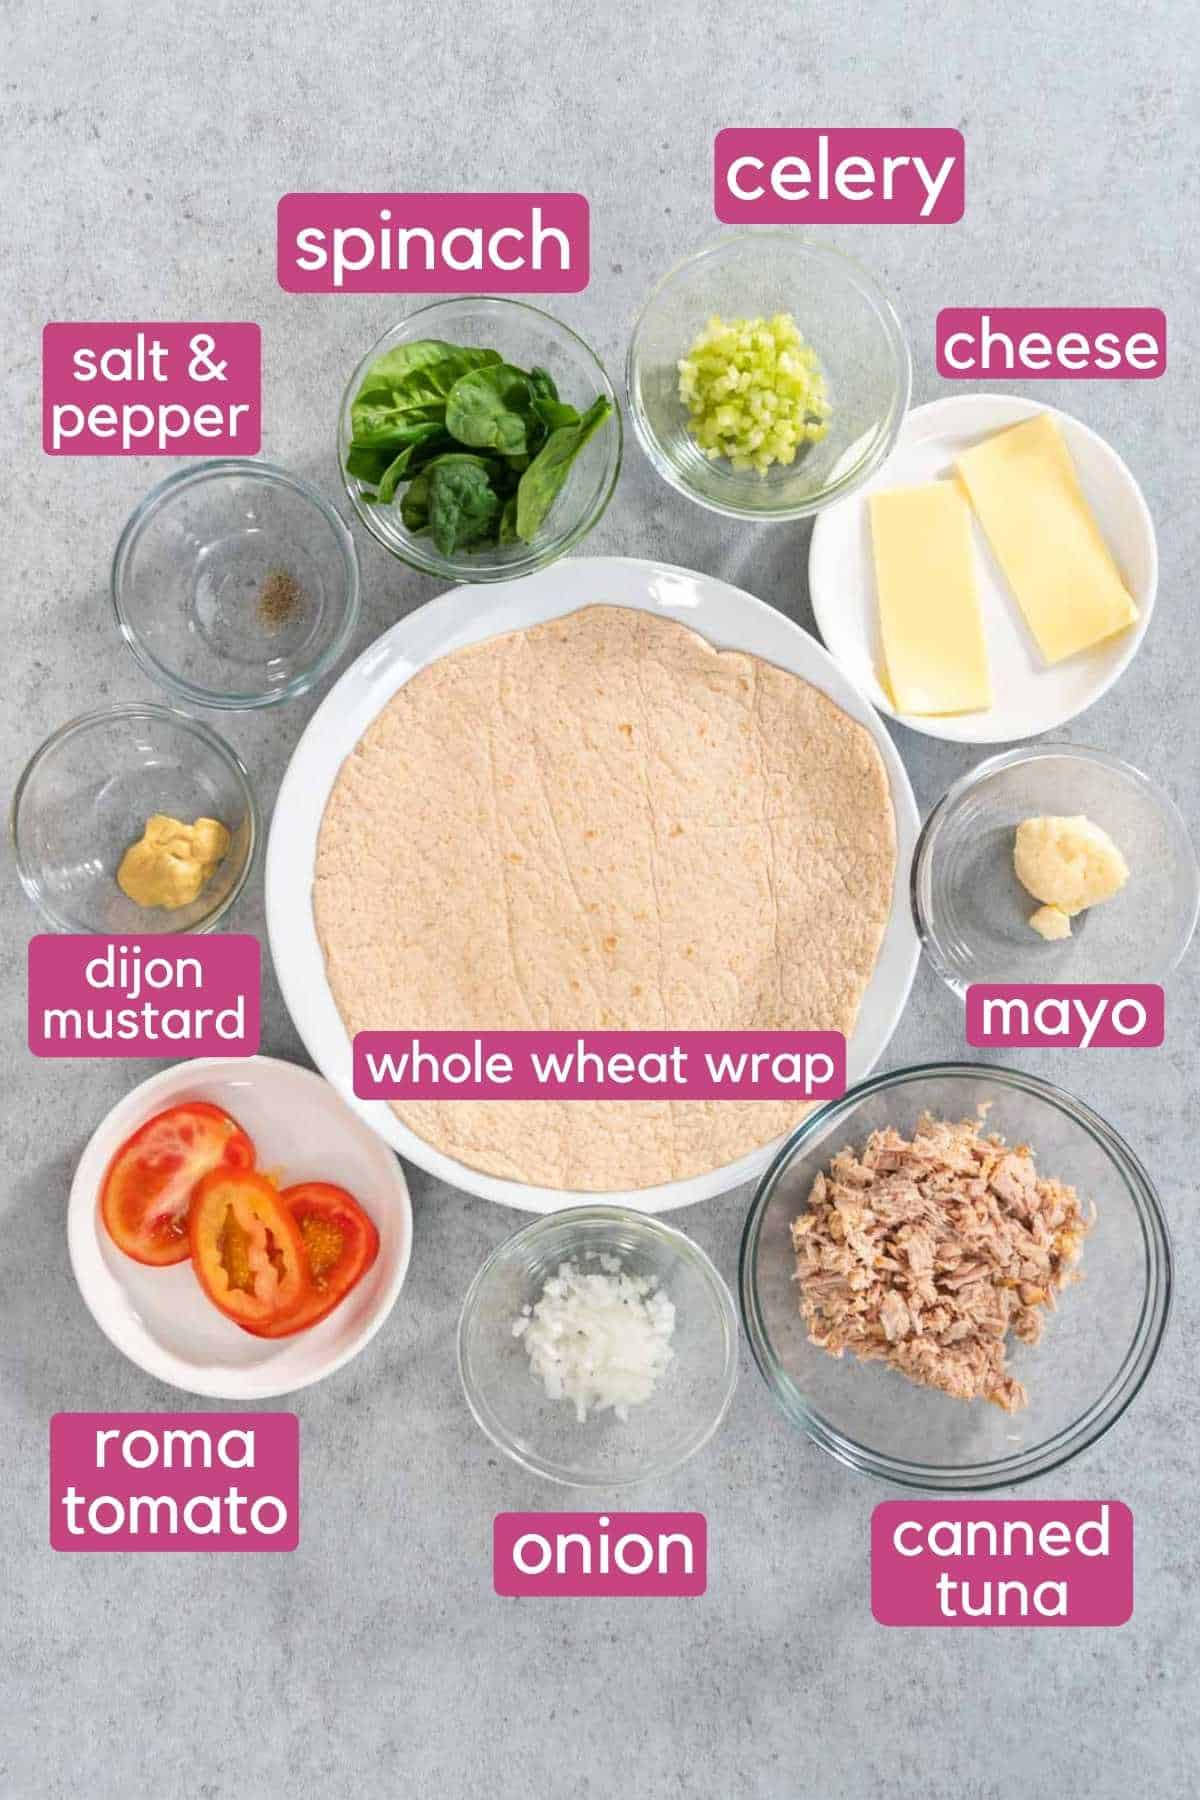 The ingredients needed to make a tuna melt wrap, including canned tuna, tomatoes, and whole wheat wrap.